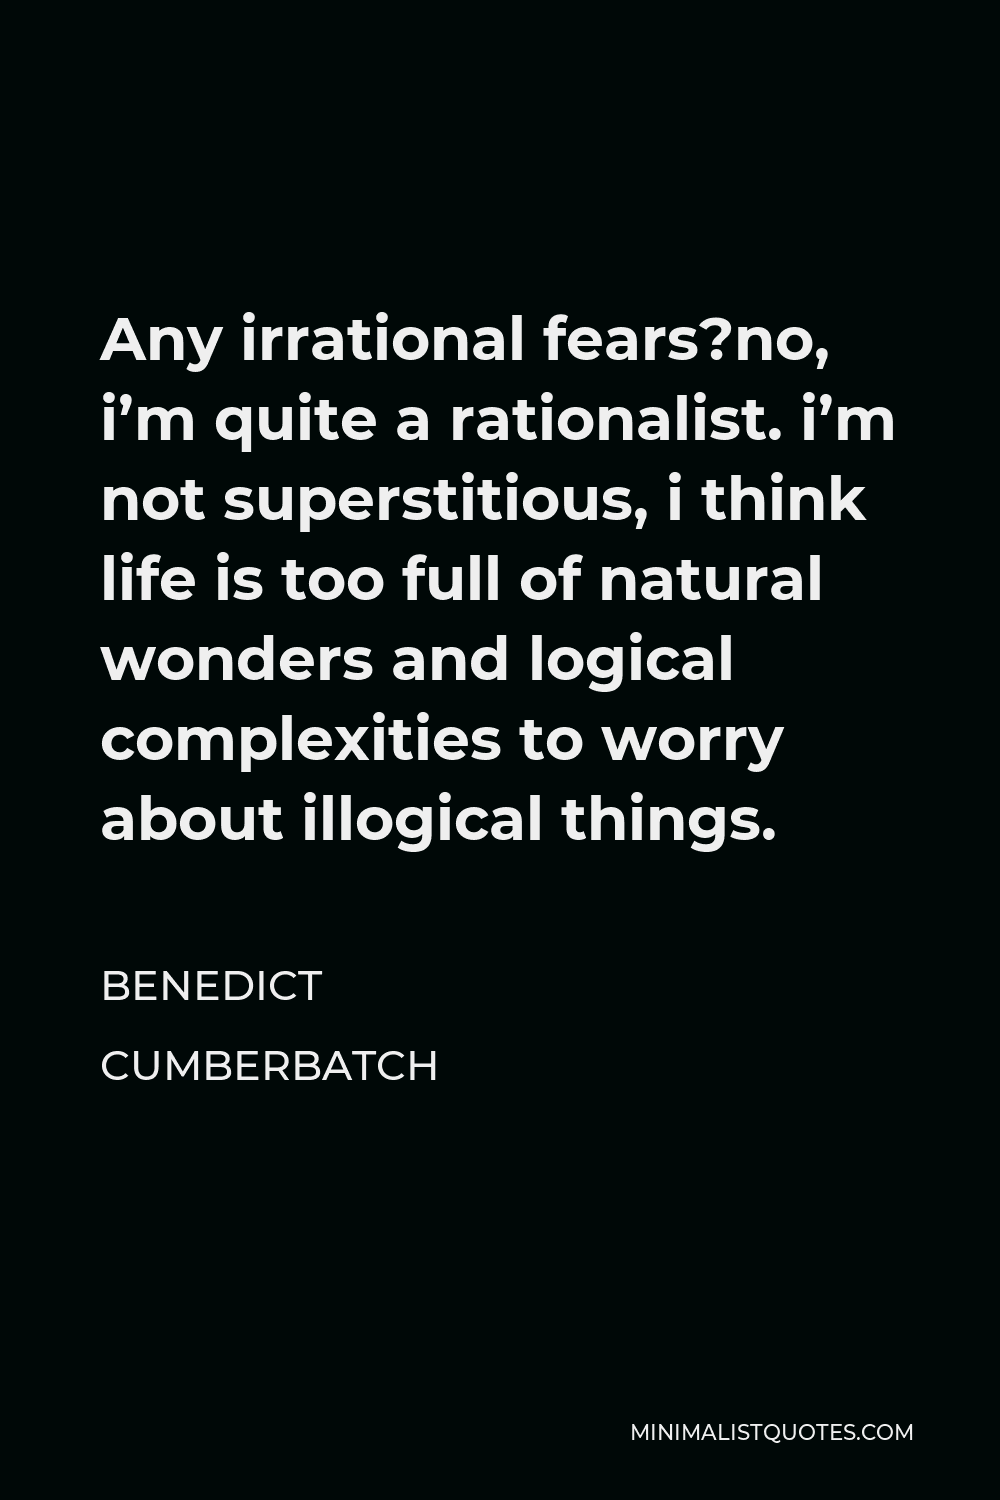 Benedict Cumberbatch Quote - Any irrational fears?no, i’m quite a rationalist. i’m not superstitious, i think life is too full of natural wonders and logical complexities to worry about illogical things.